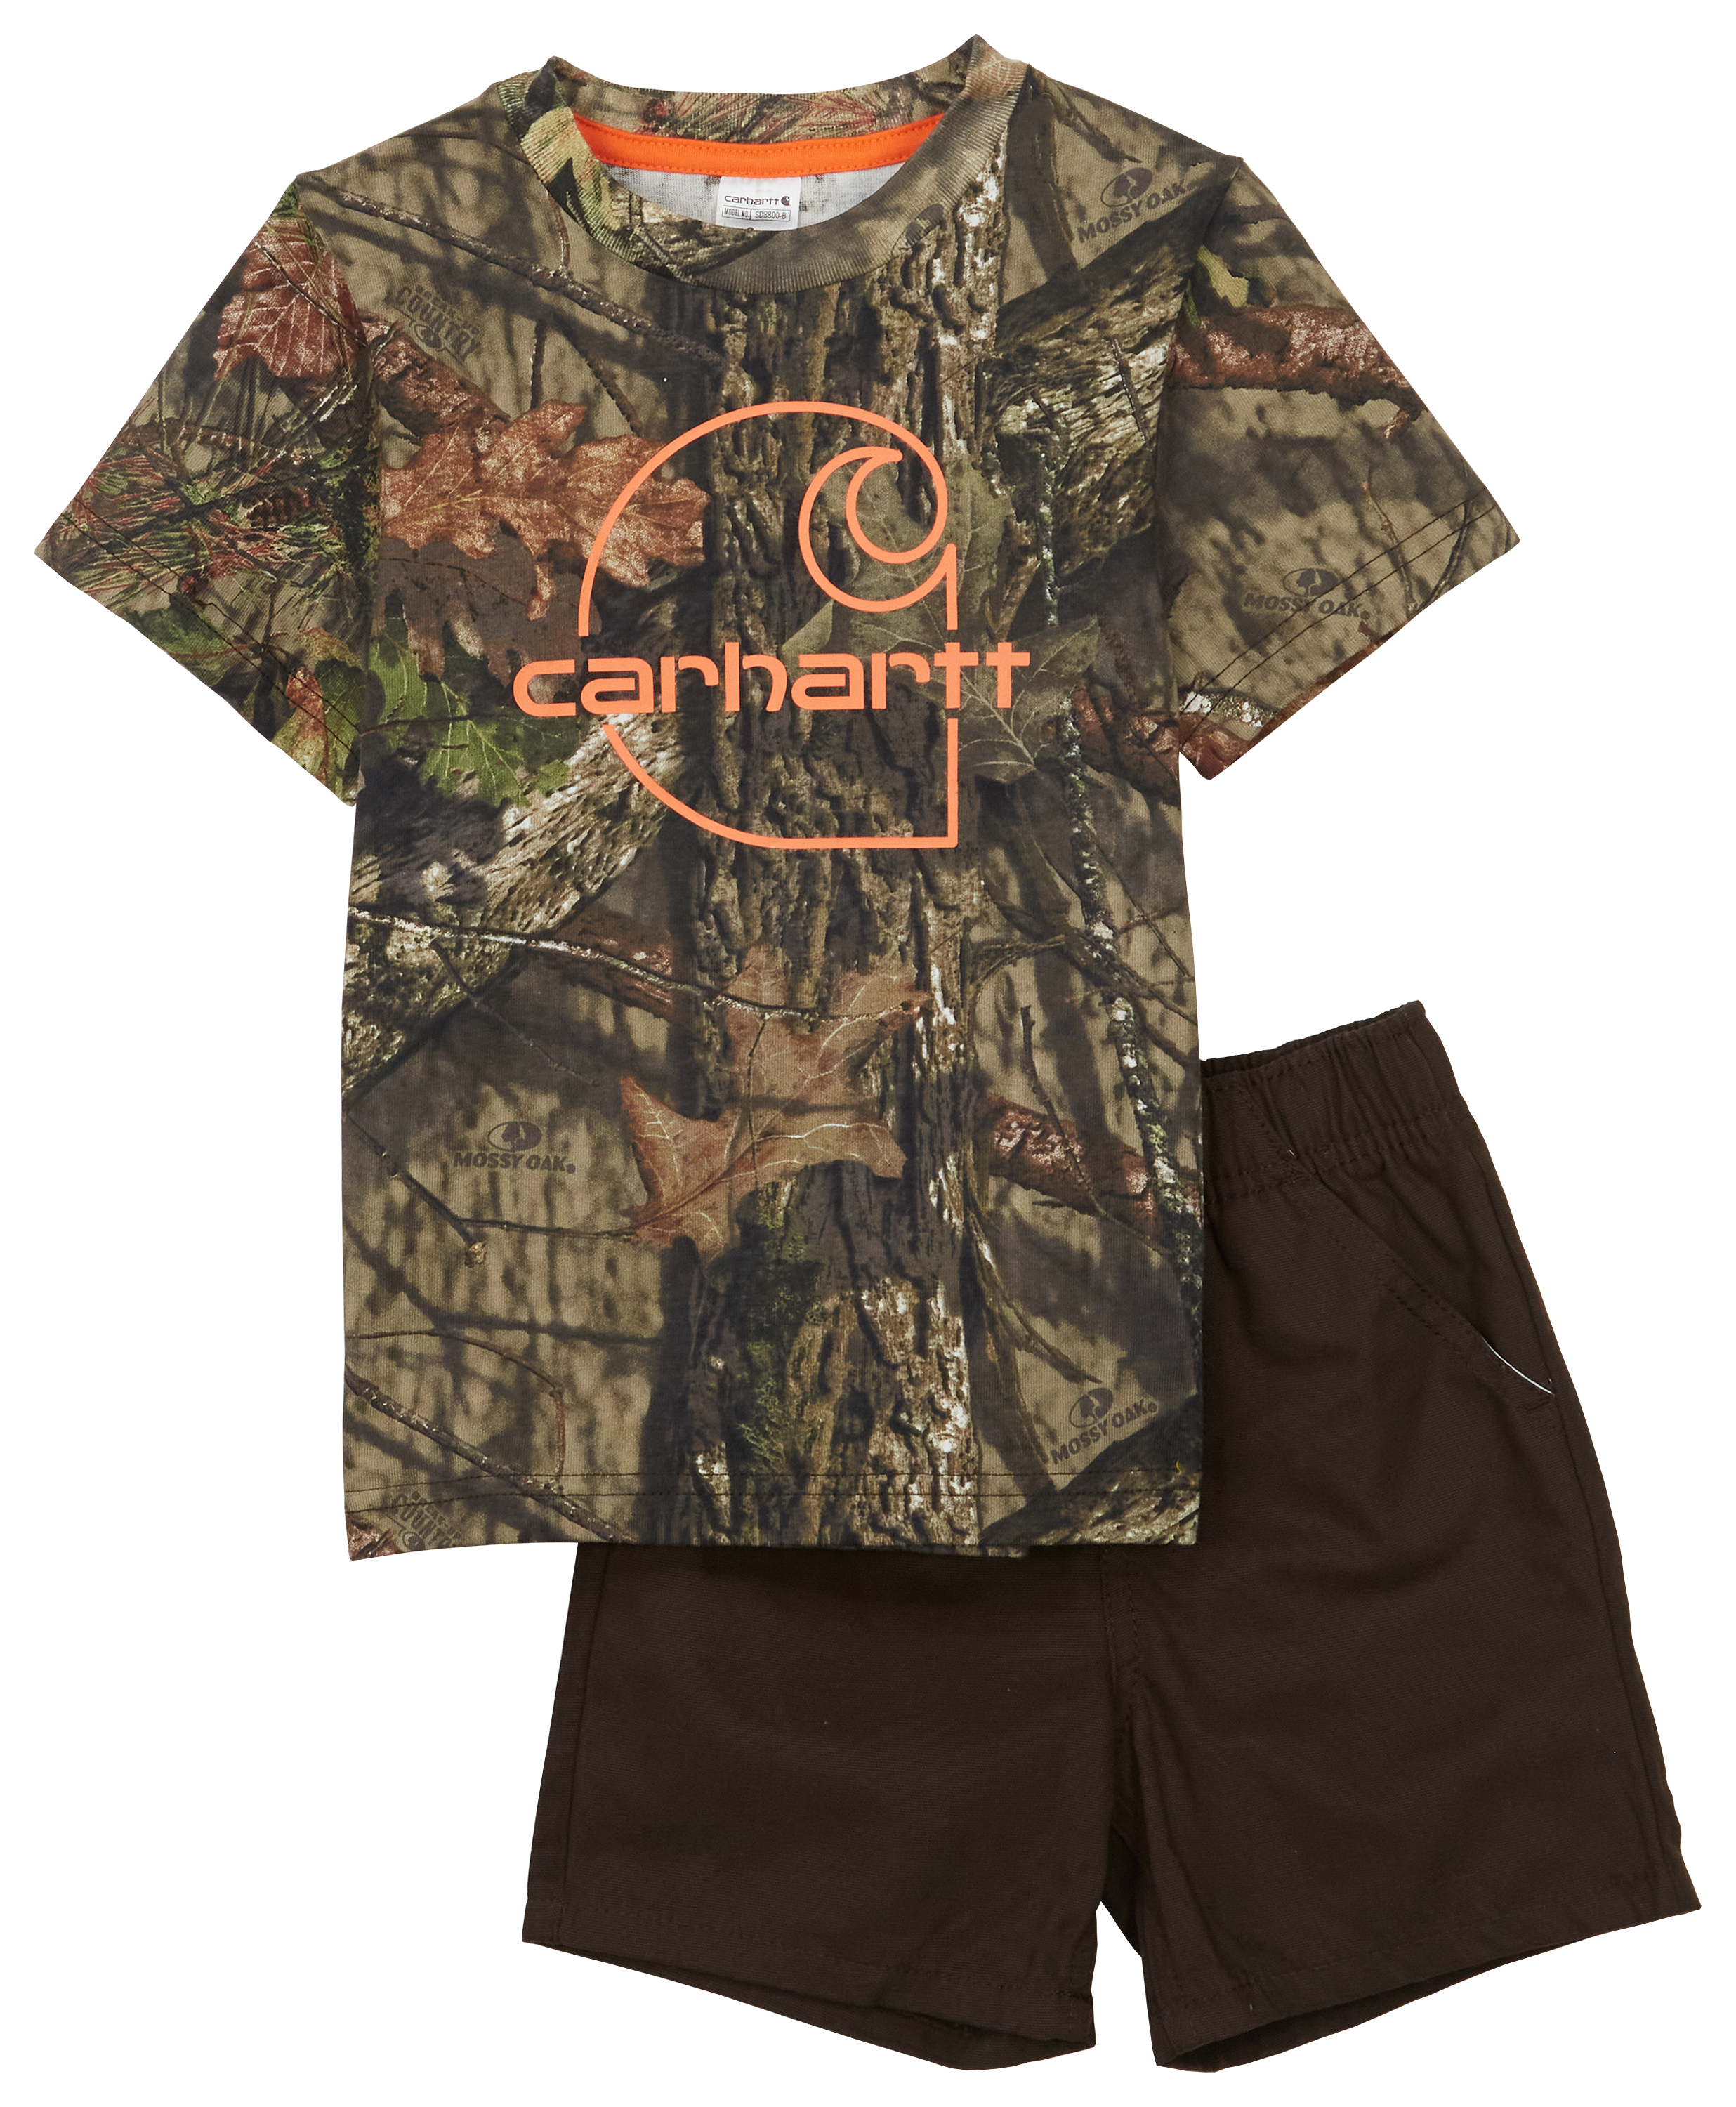 Carhartt Camo Short Sleeve T Shirt and Canvas Shorts Set for Toddler Boys Mossy Oak Break Up Country/Mustang Brown 3T